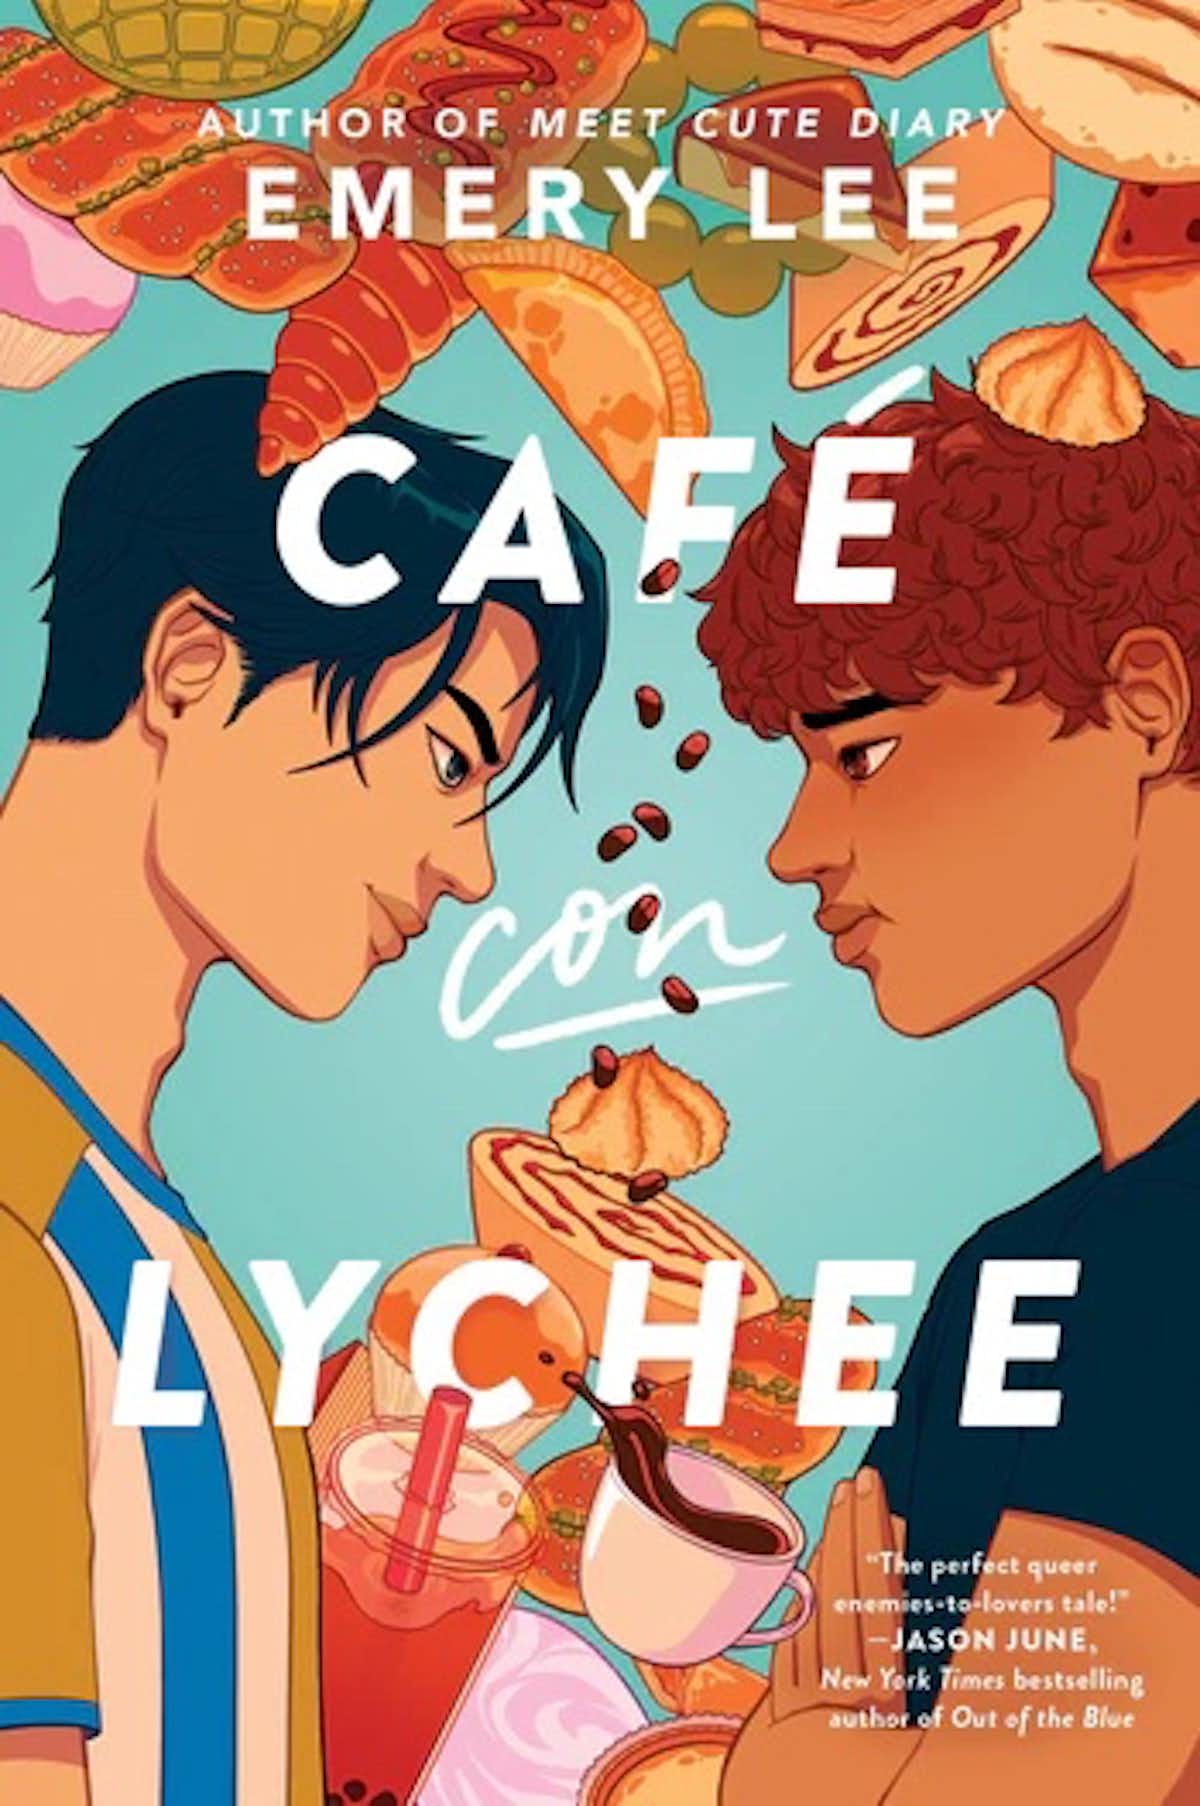 Two male-presenting teens of color on a book cover with drinks and fruit around them